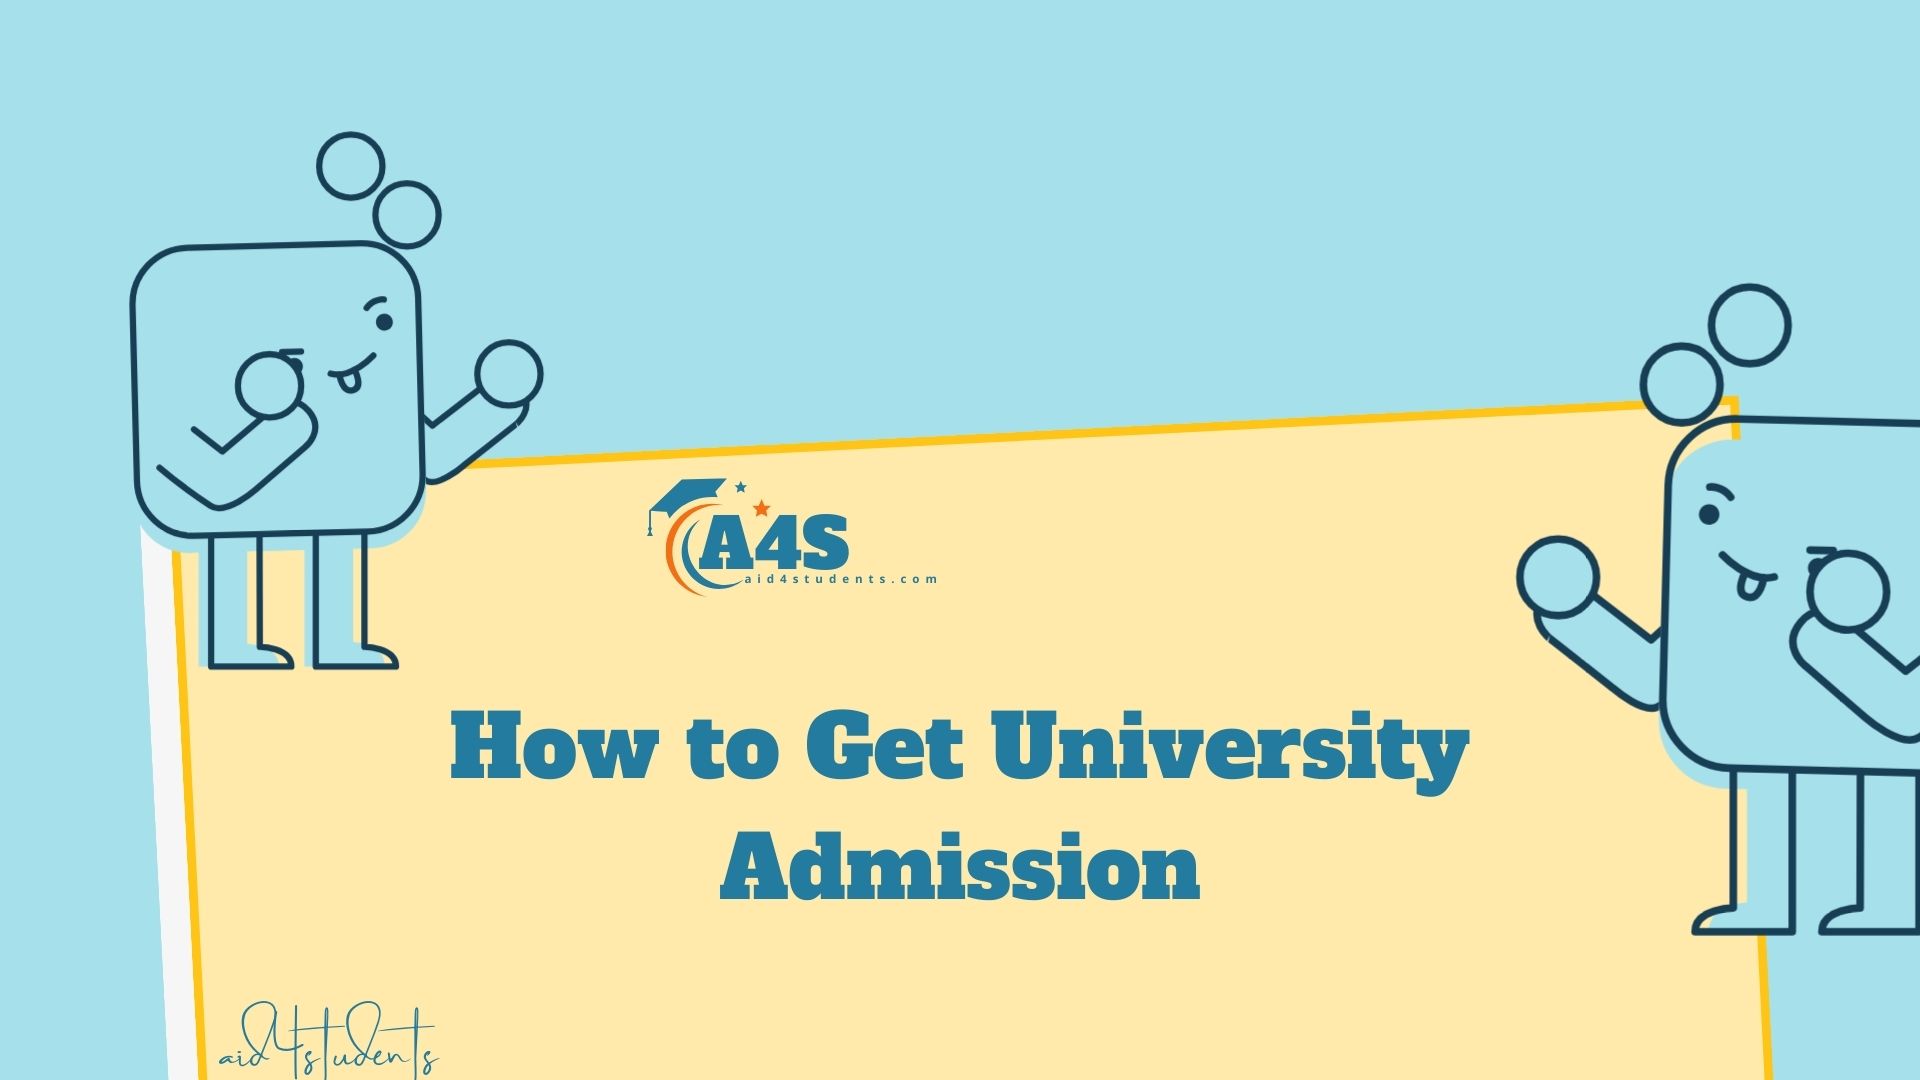 How to Get University Admission